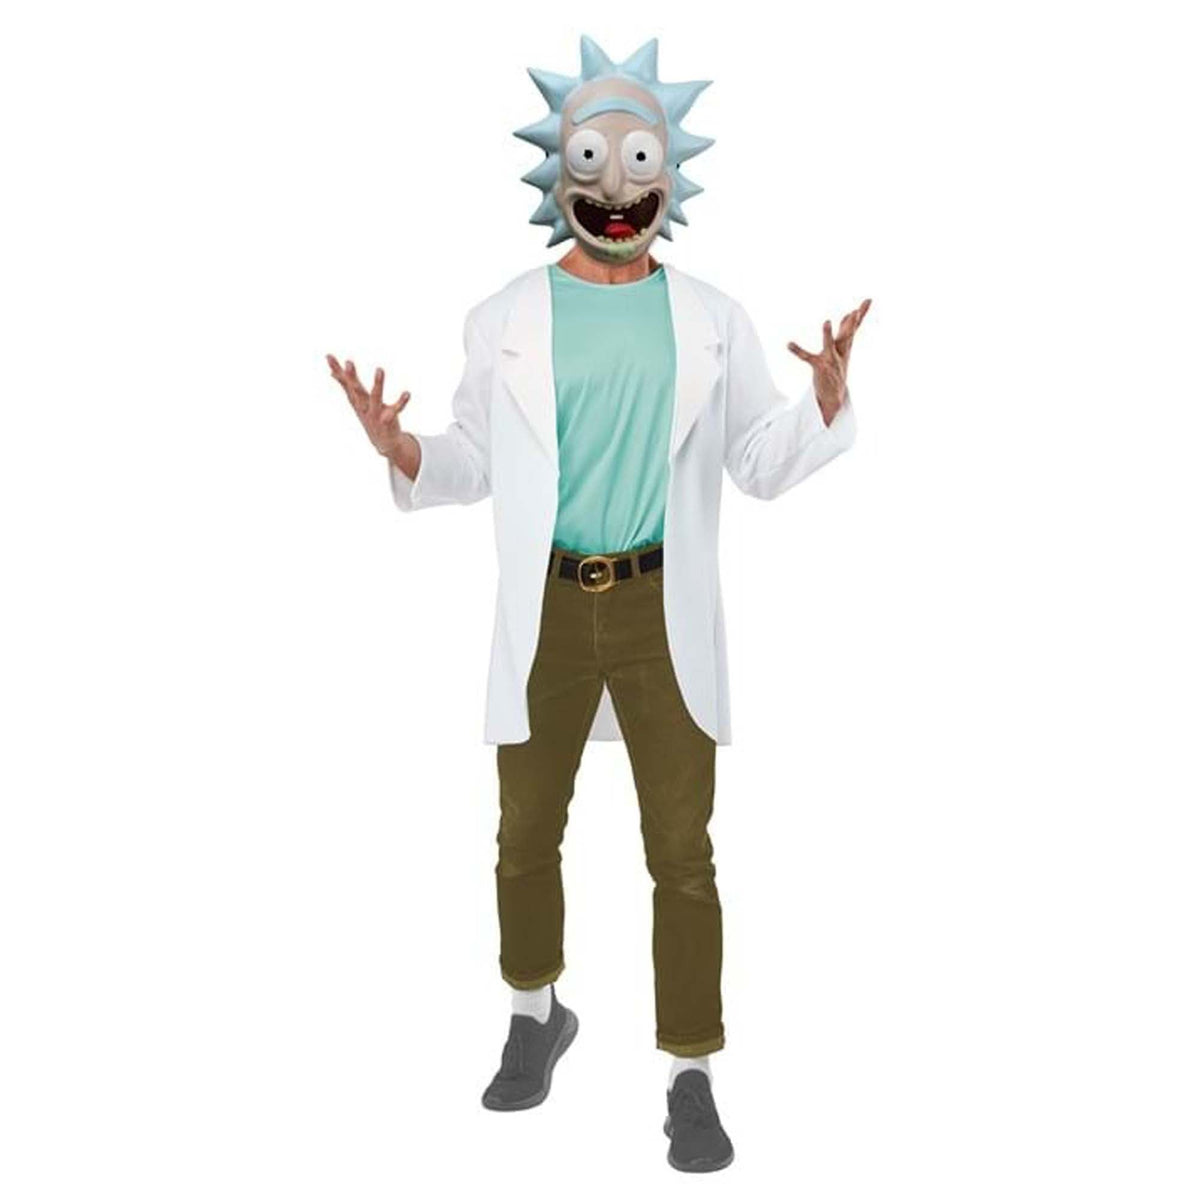 RUBIES II (Ruby Slipper Sales) Costumes Rick and Morty, Rick Costume for Adults, White Lab Coat